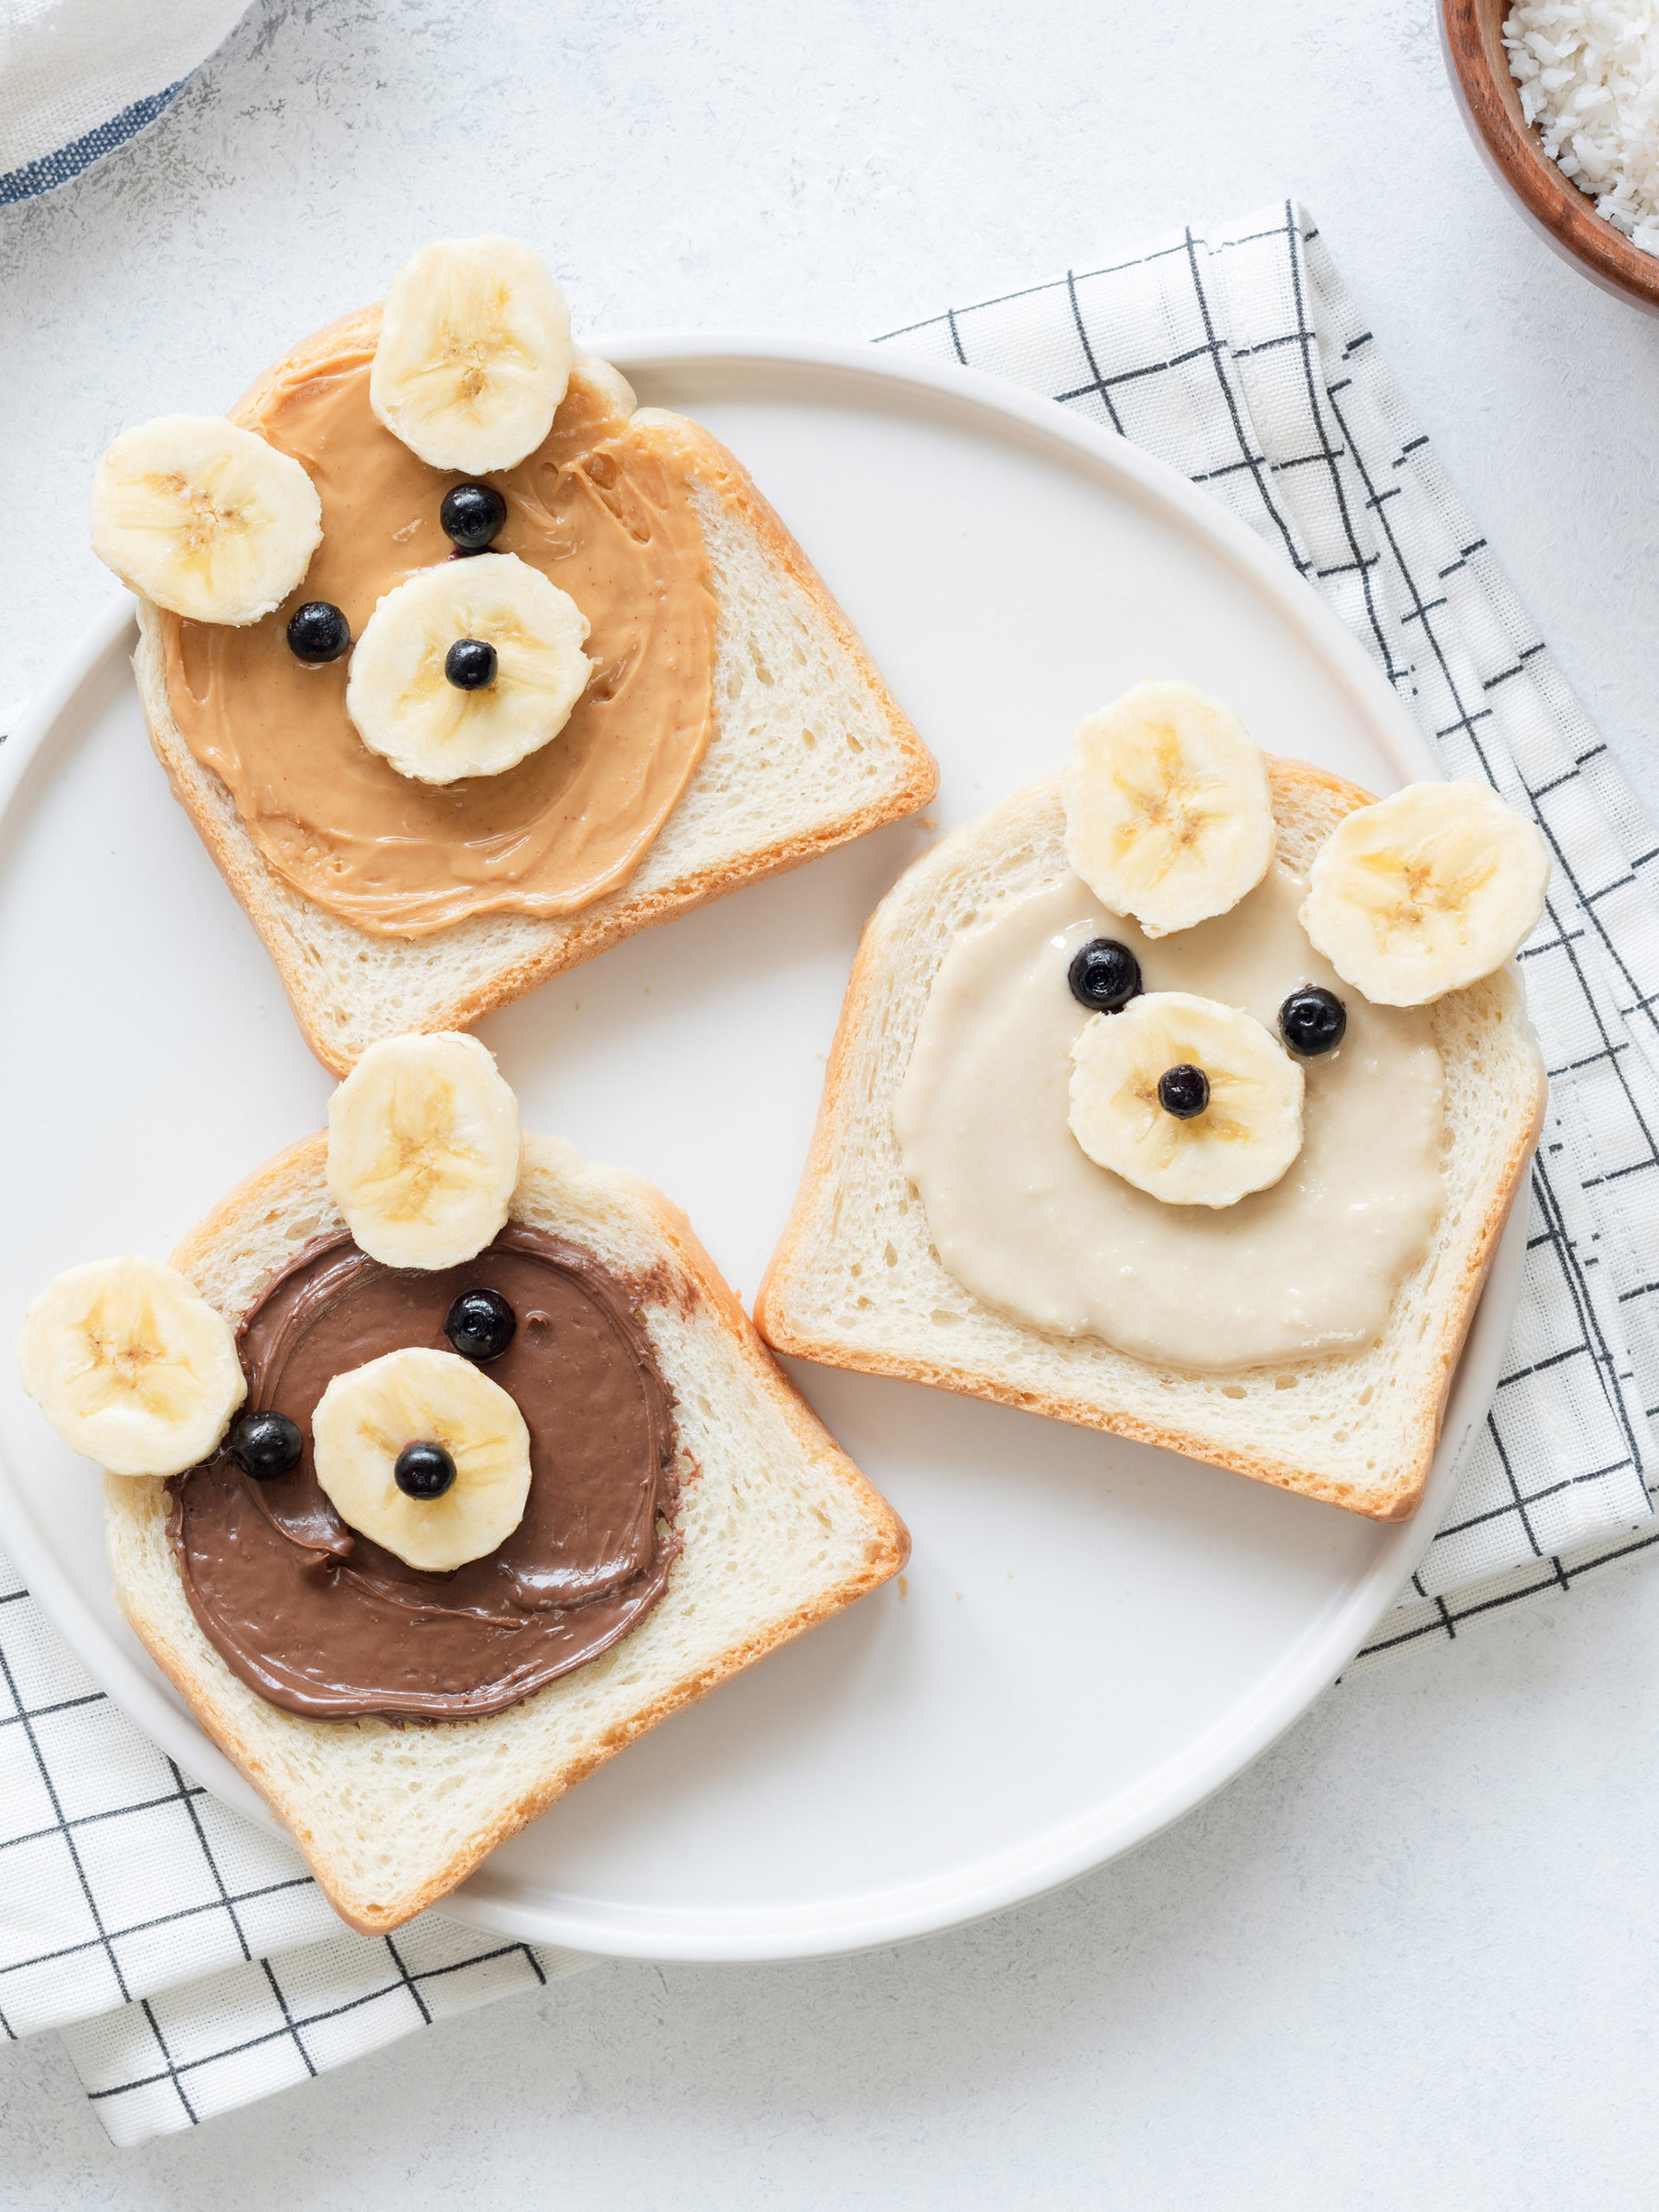 Breakfast toasts with nut butter and banana made to look like a cute bear face